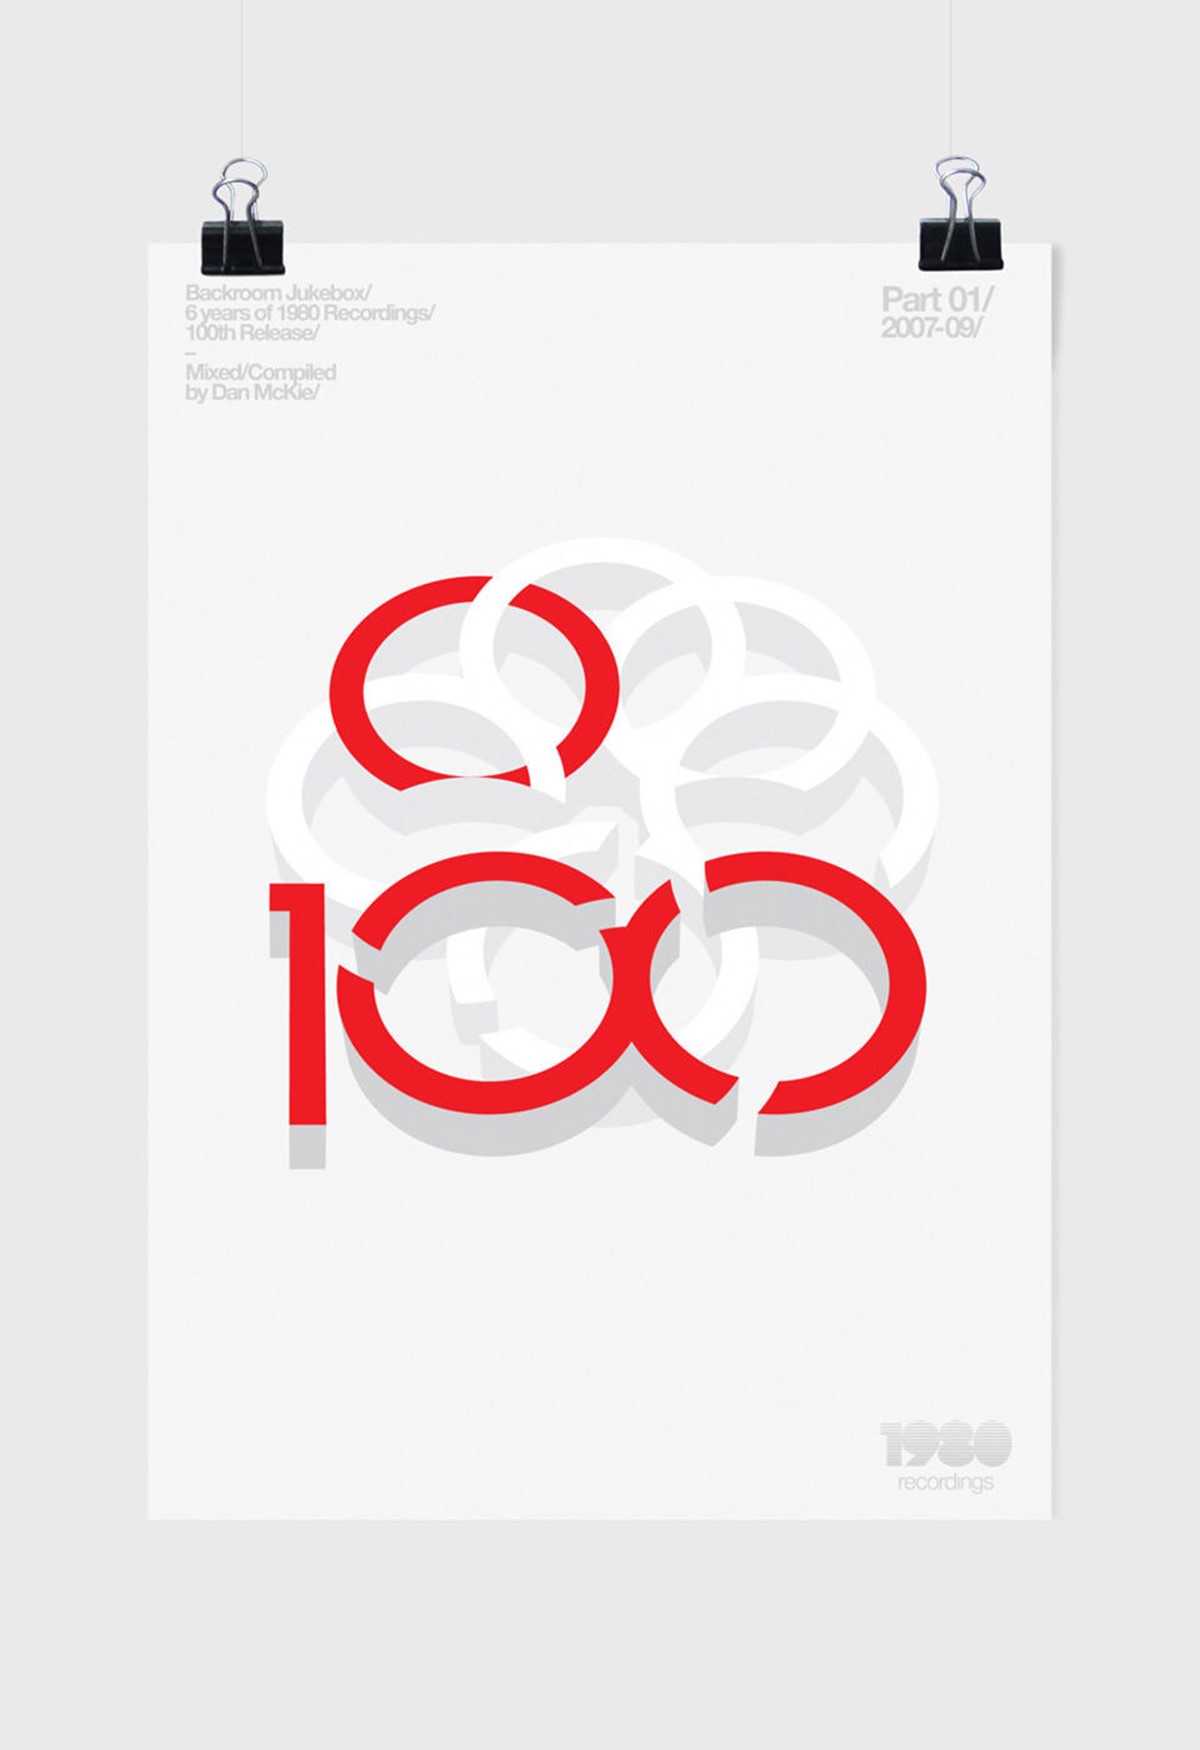 1980 Recordings. 100 releases album poster artwork. Brand identity design by Superfried.